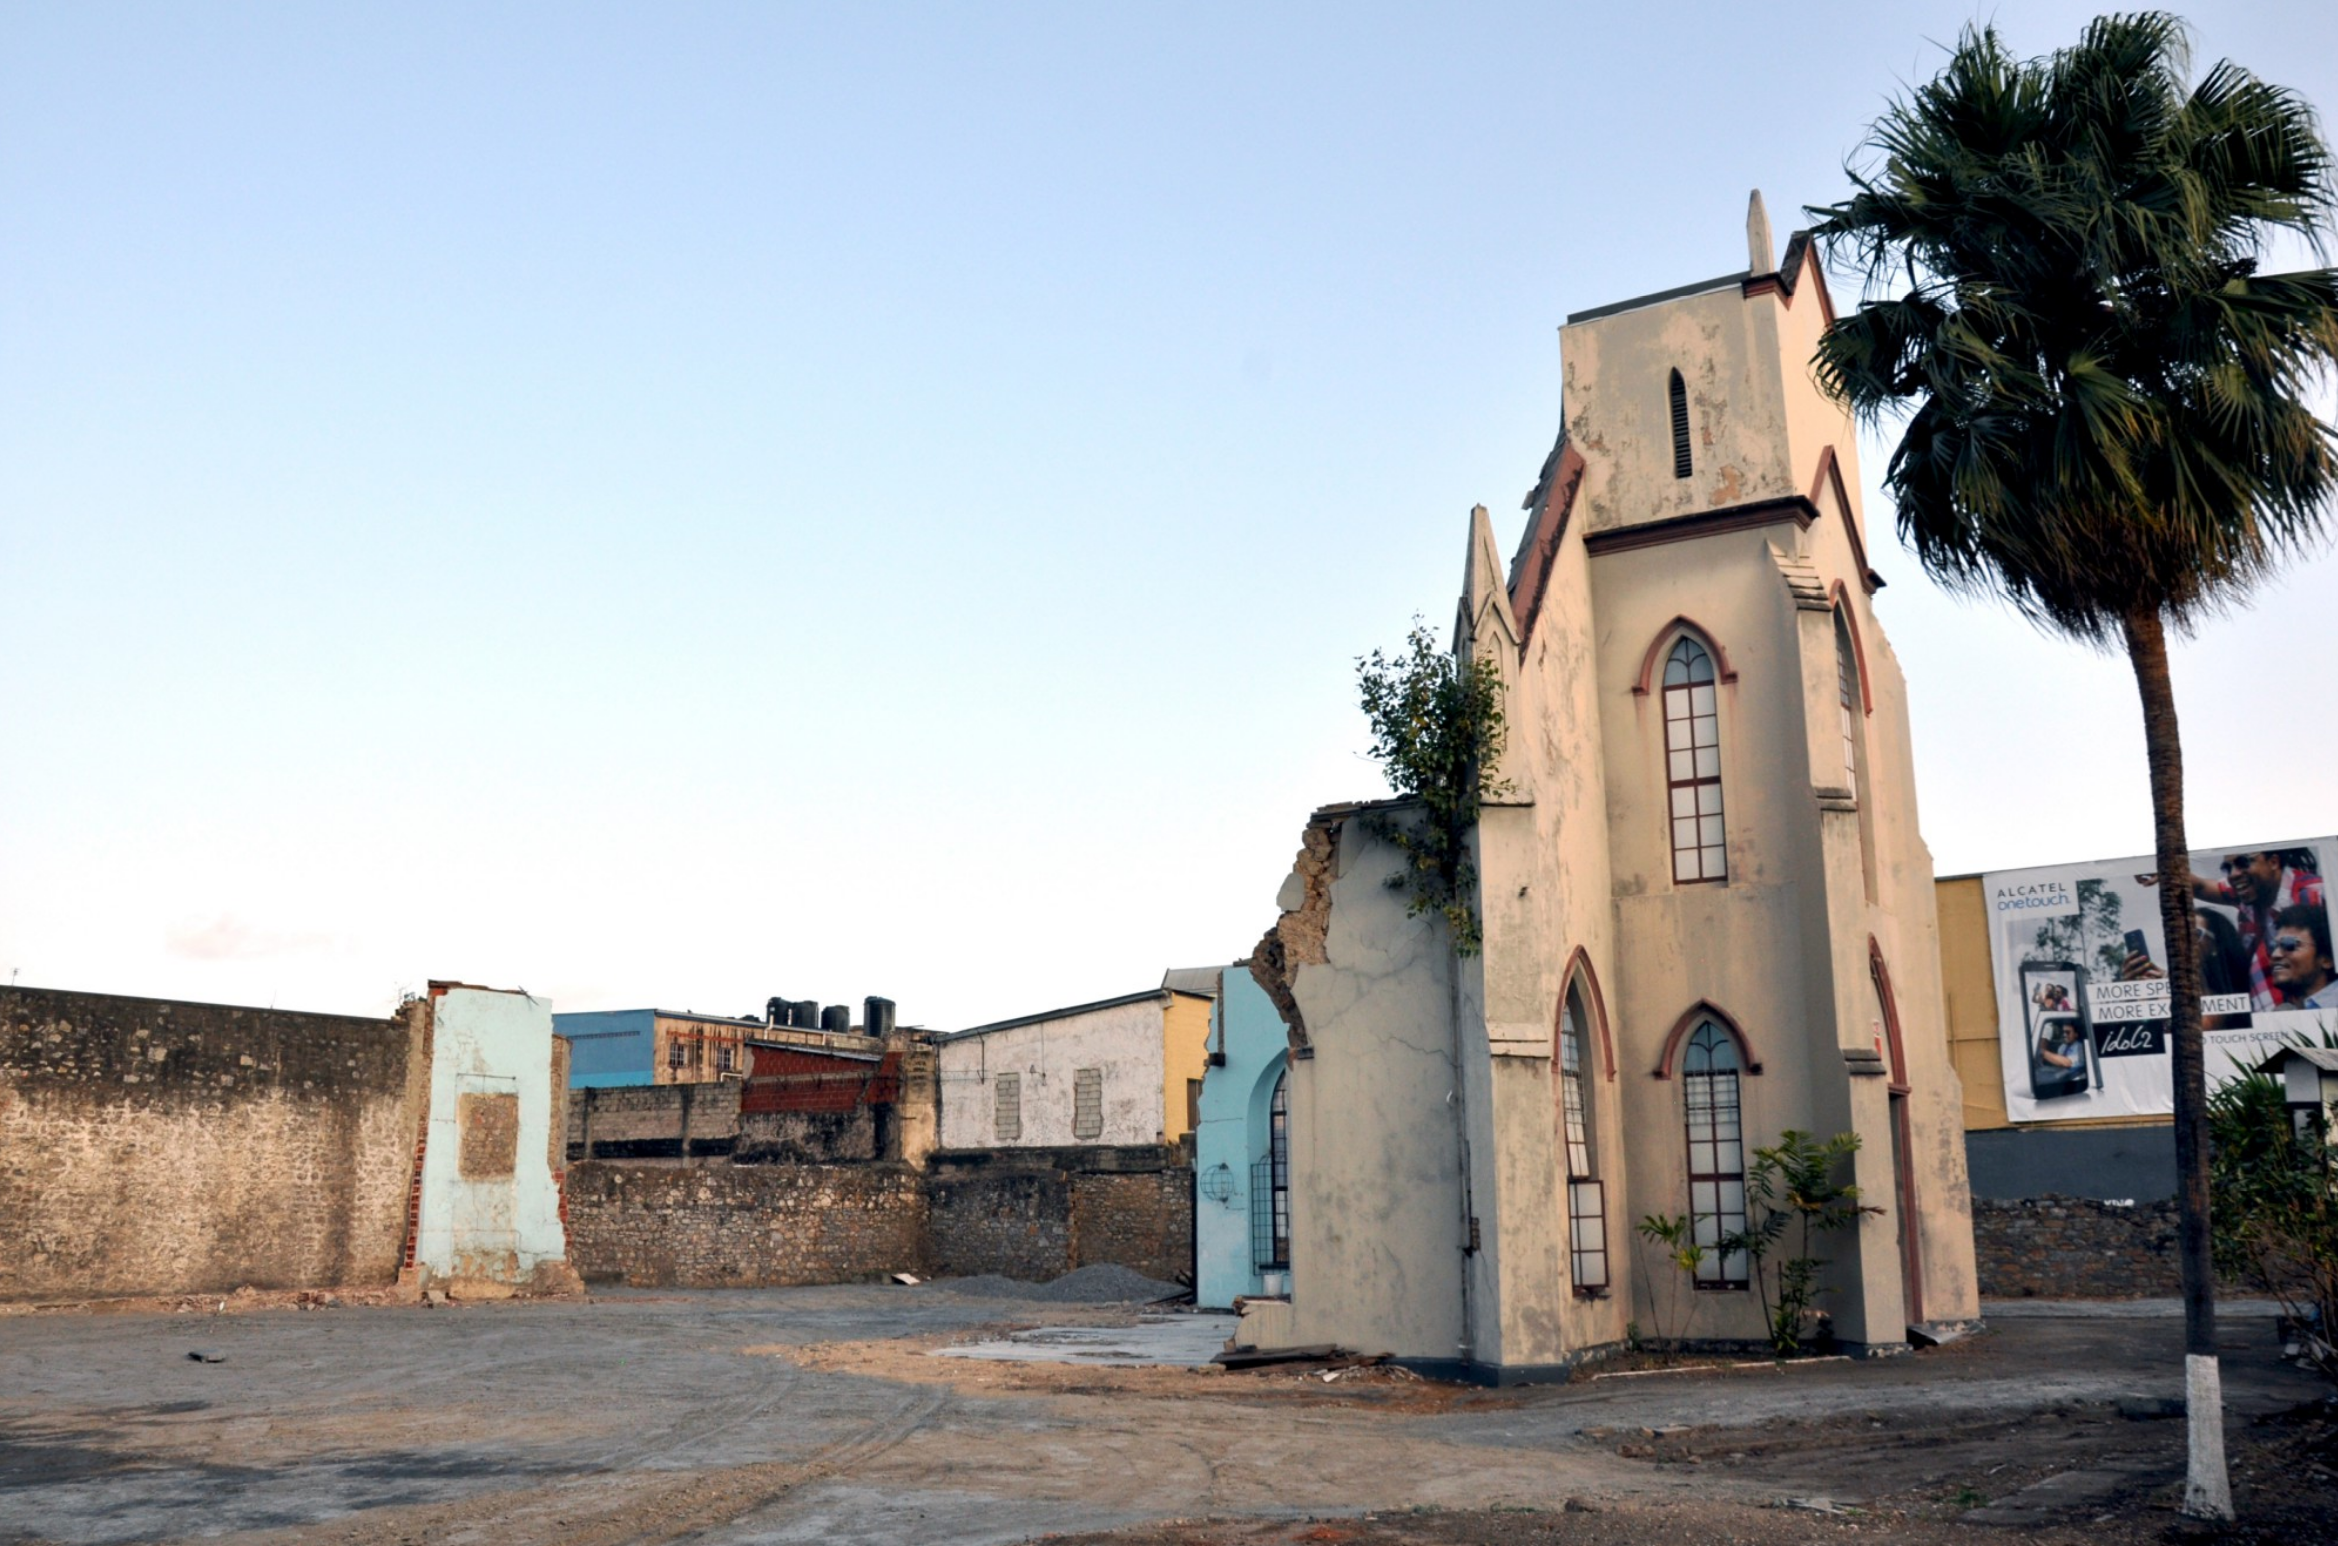 The church partially demolished in 2014